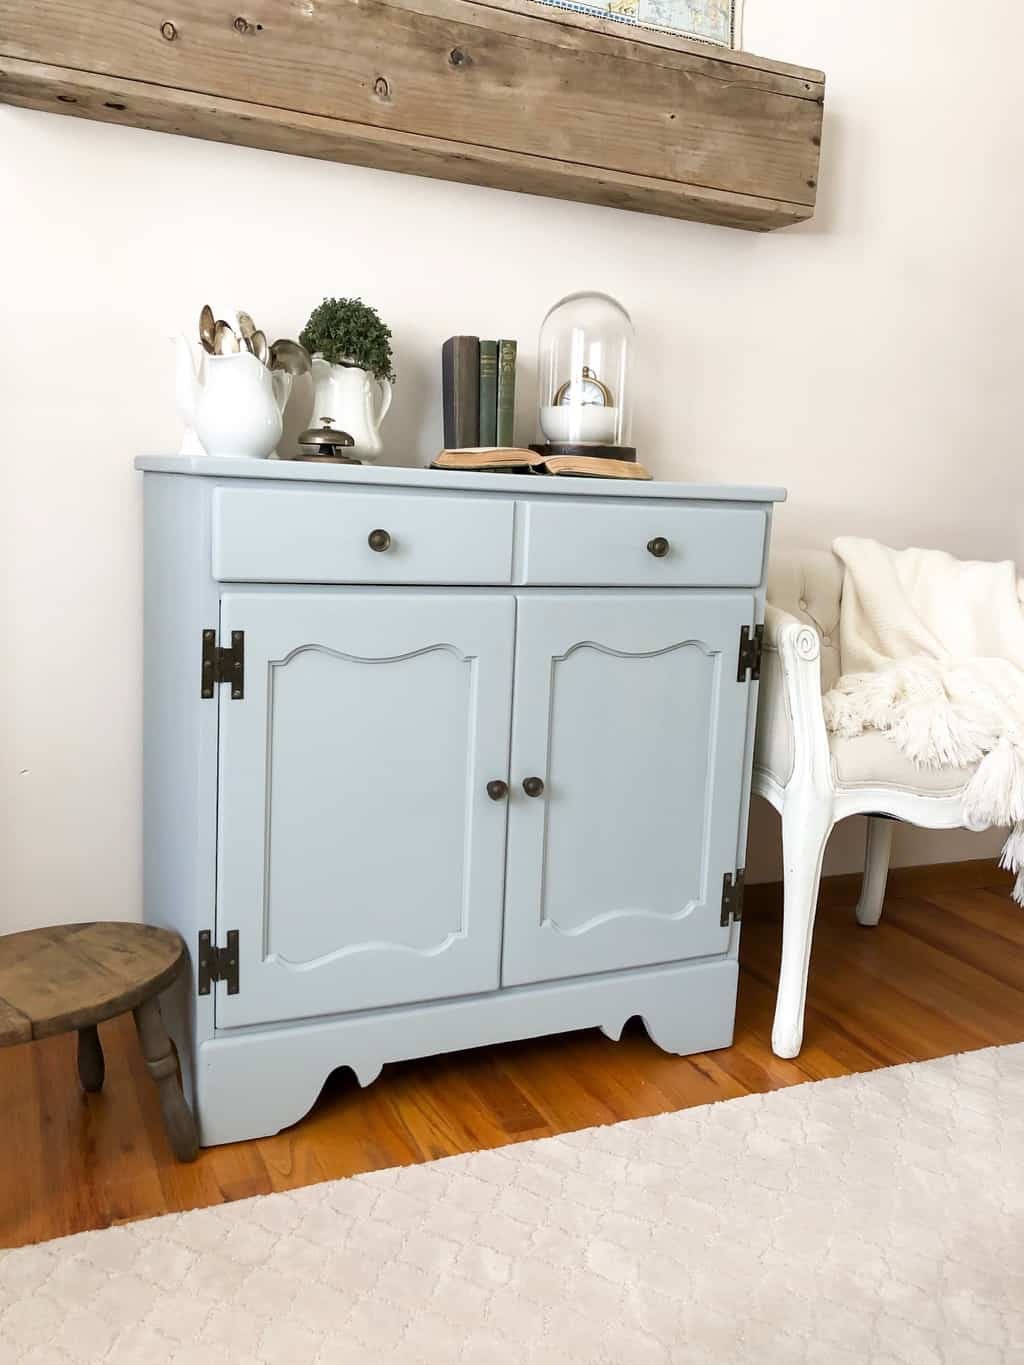 If you are looking for the best paint for furniture pieces, click over to find the best paint for all your furniture projects.